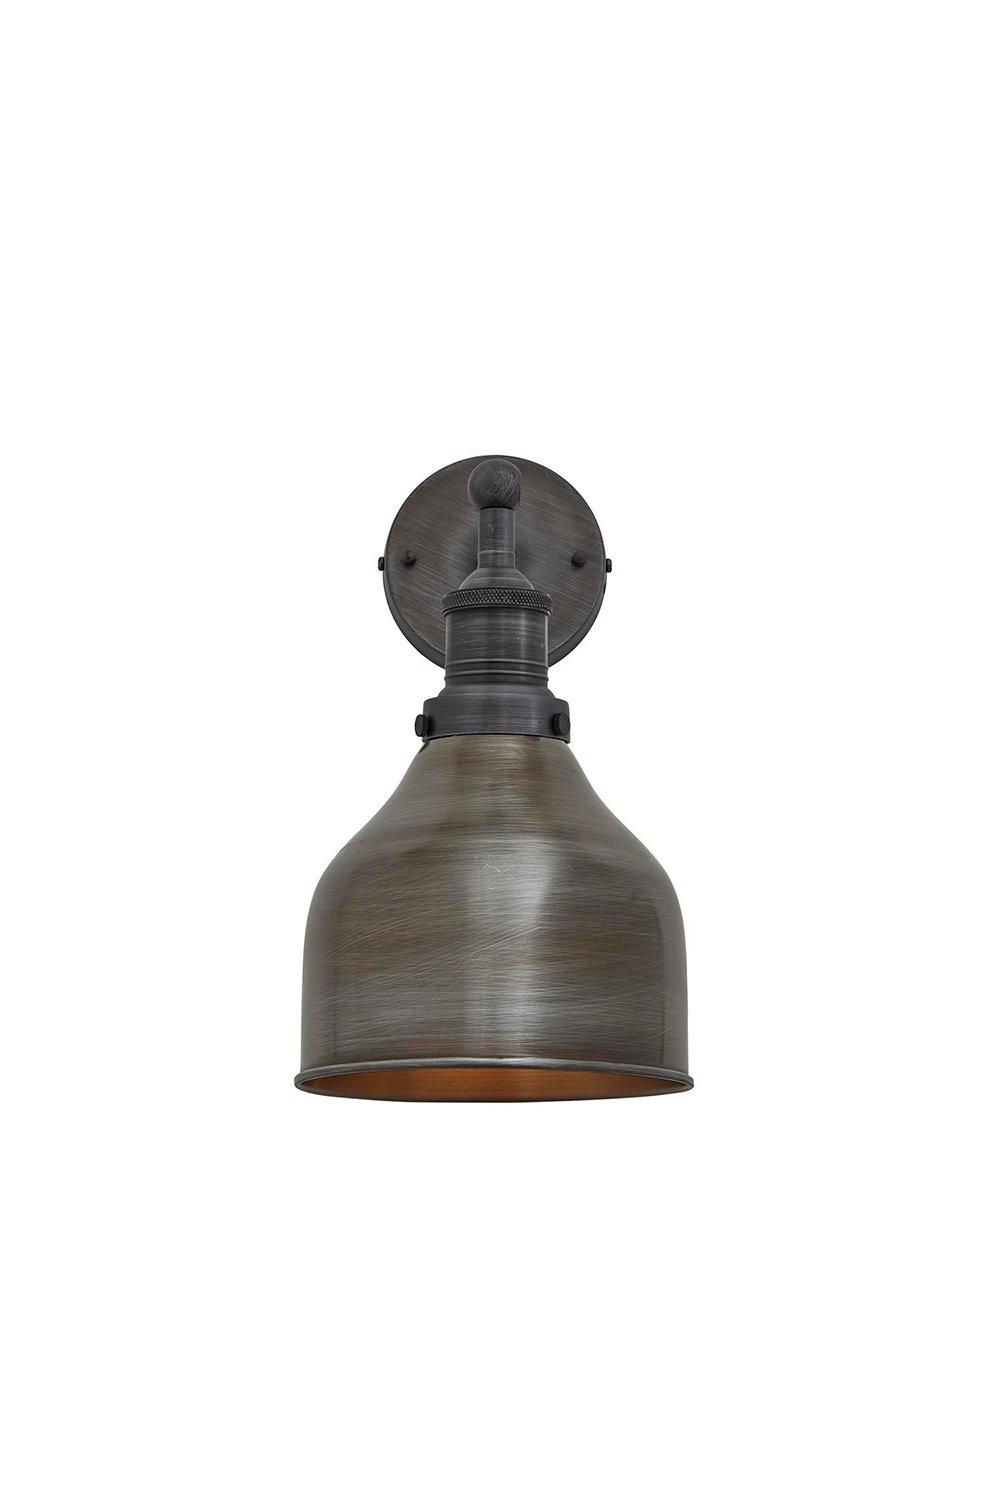 Brooklyn Cone Wall Light, 7 Inch, Pewter, Pewter Holder